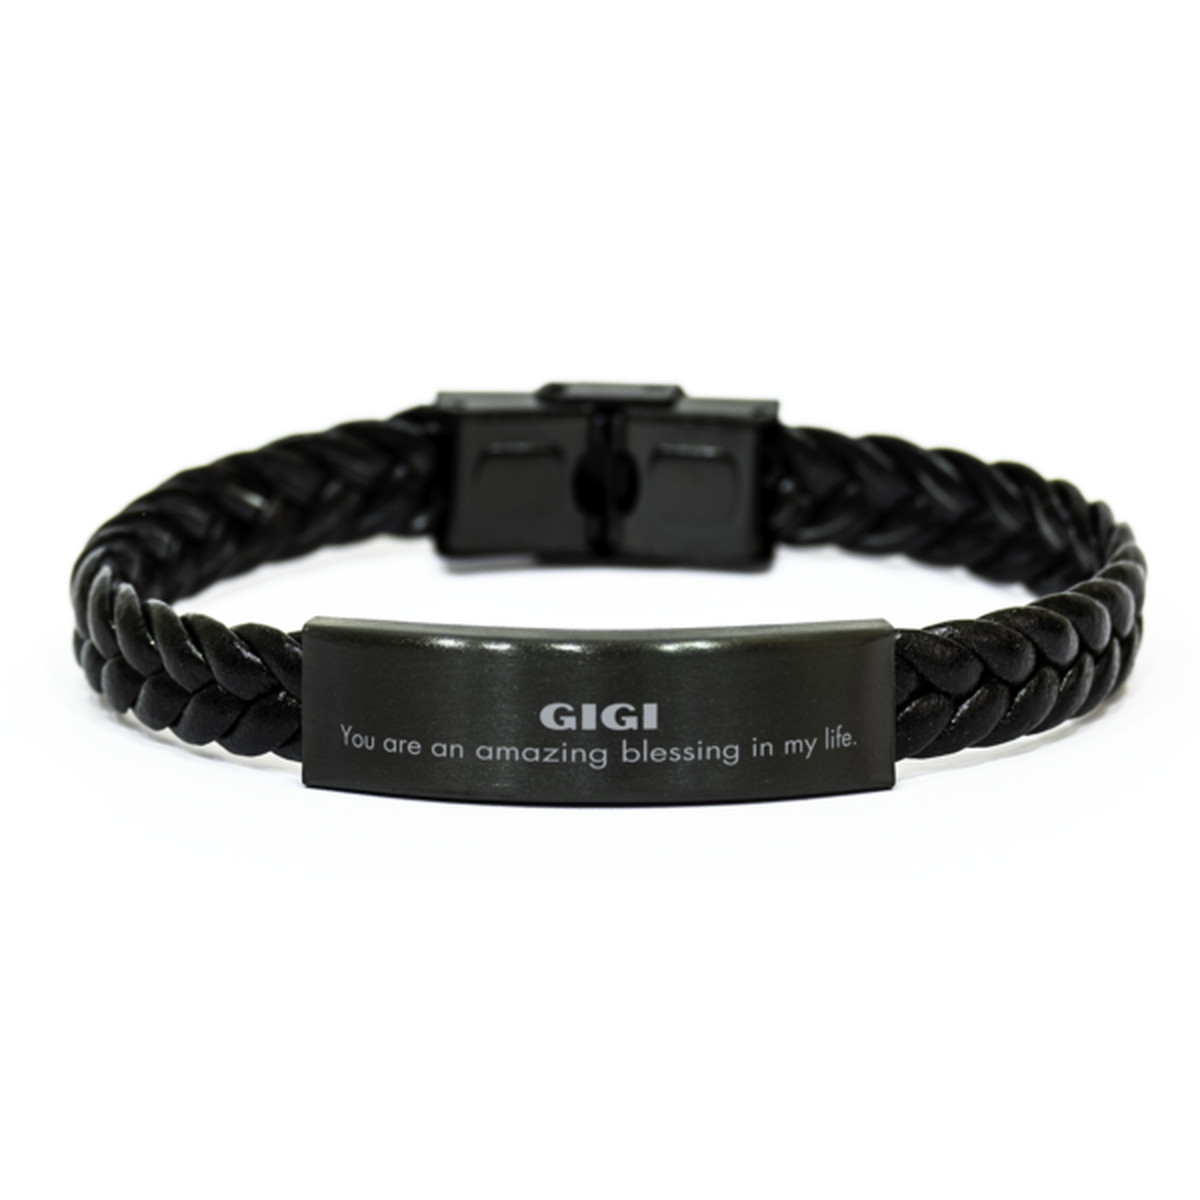 Gigi Braided Leather Bracelet, You are an amazing blessing in my life, Thank You Gifts For Gigi, Inspirational Birthday Christmas Unique Gifts For Gigi